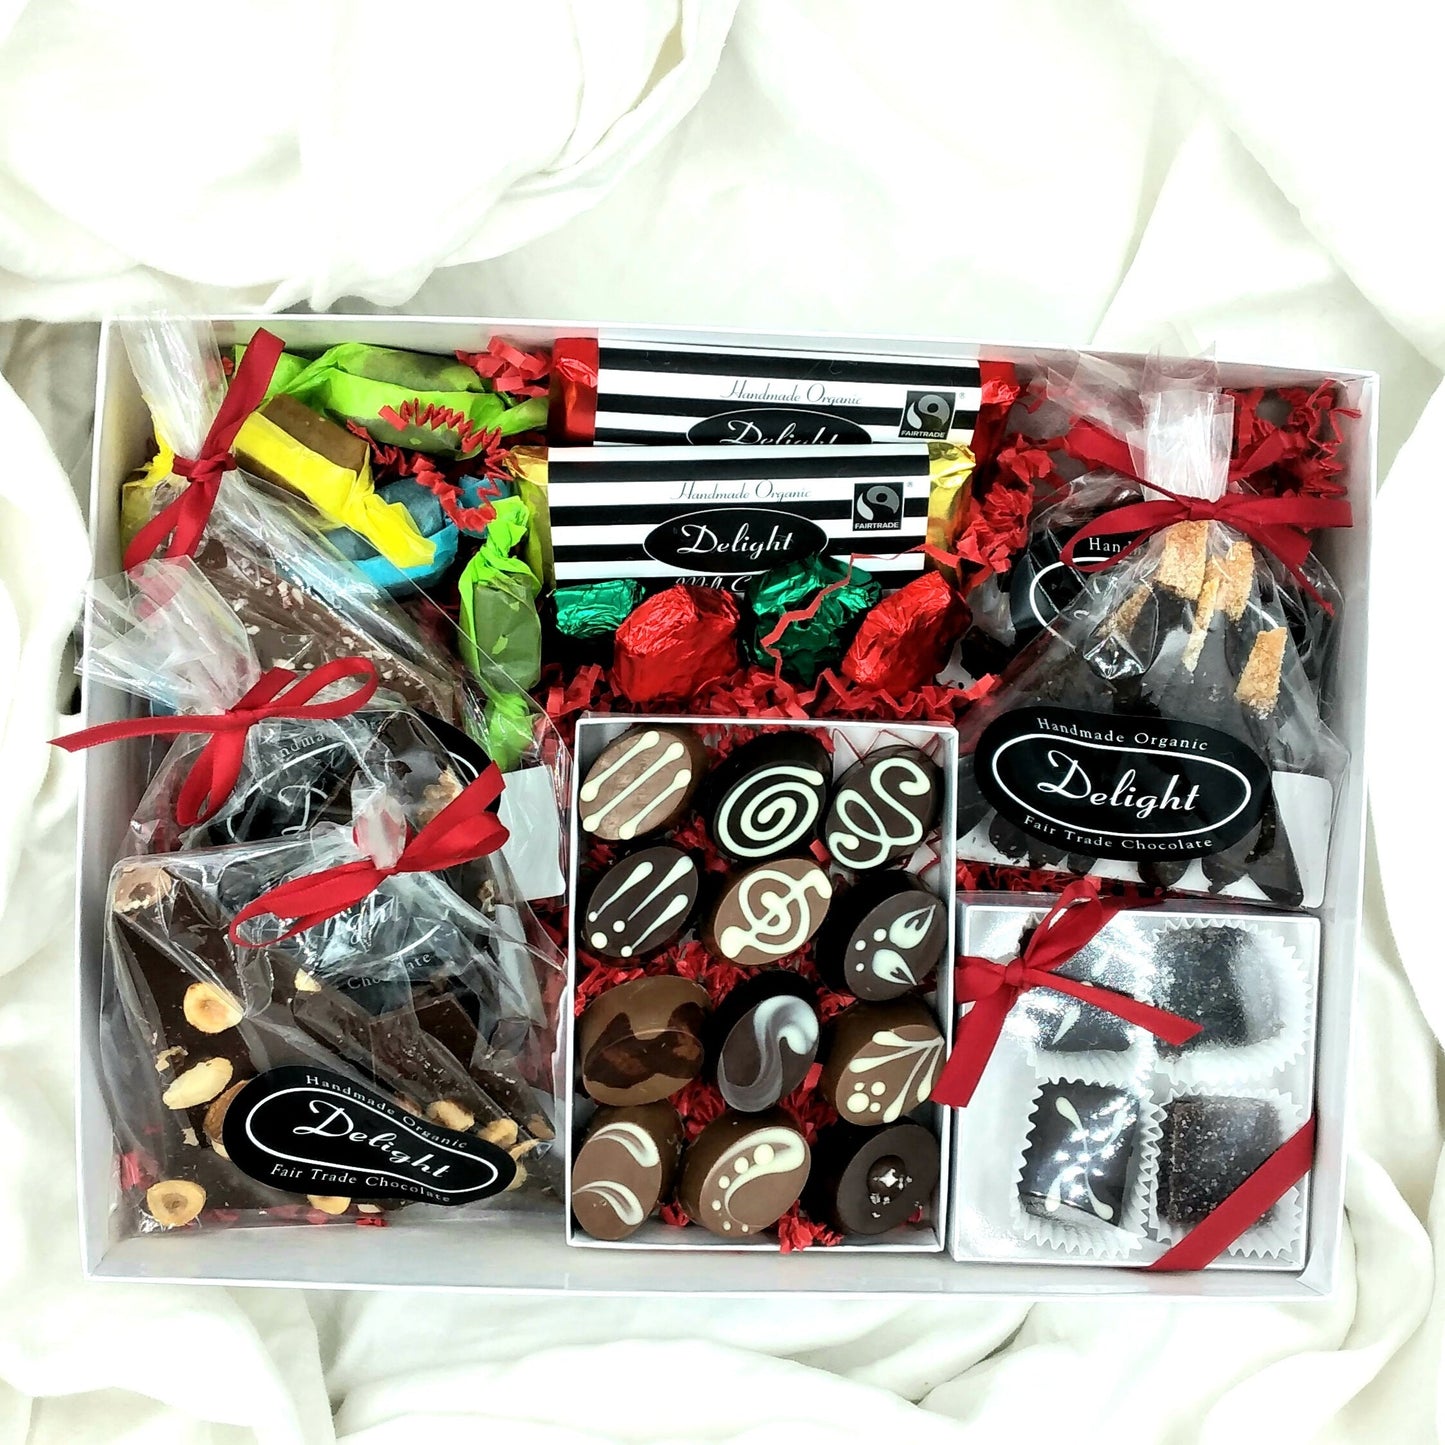 Give the gift of the ultimate chocolate box: the Delight Bliss Box!